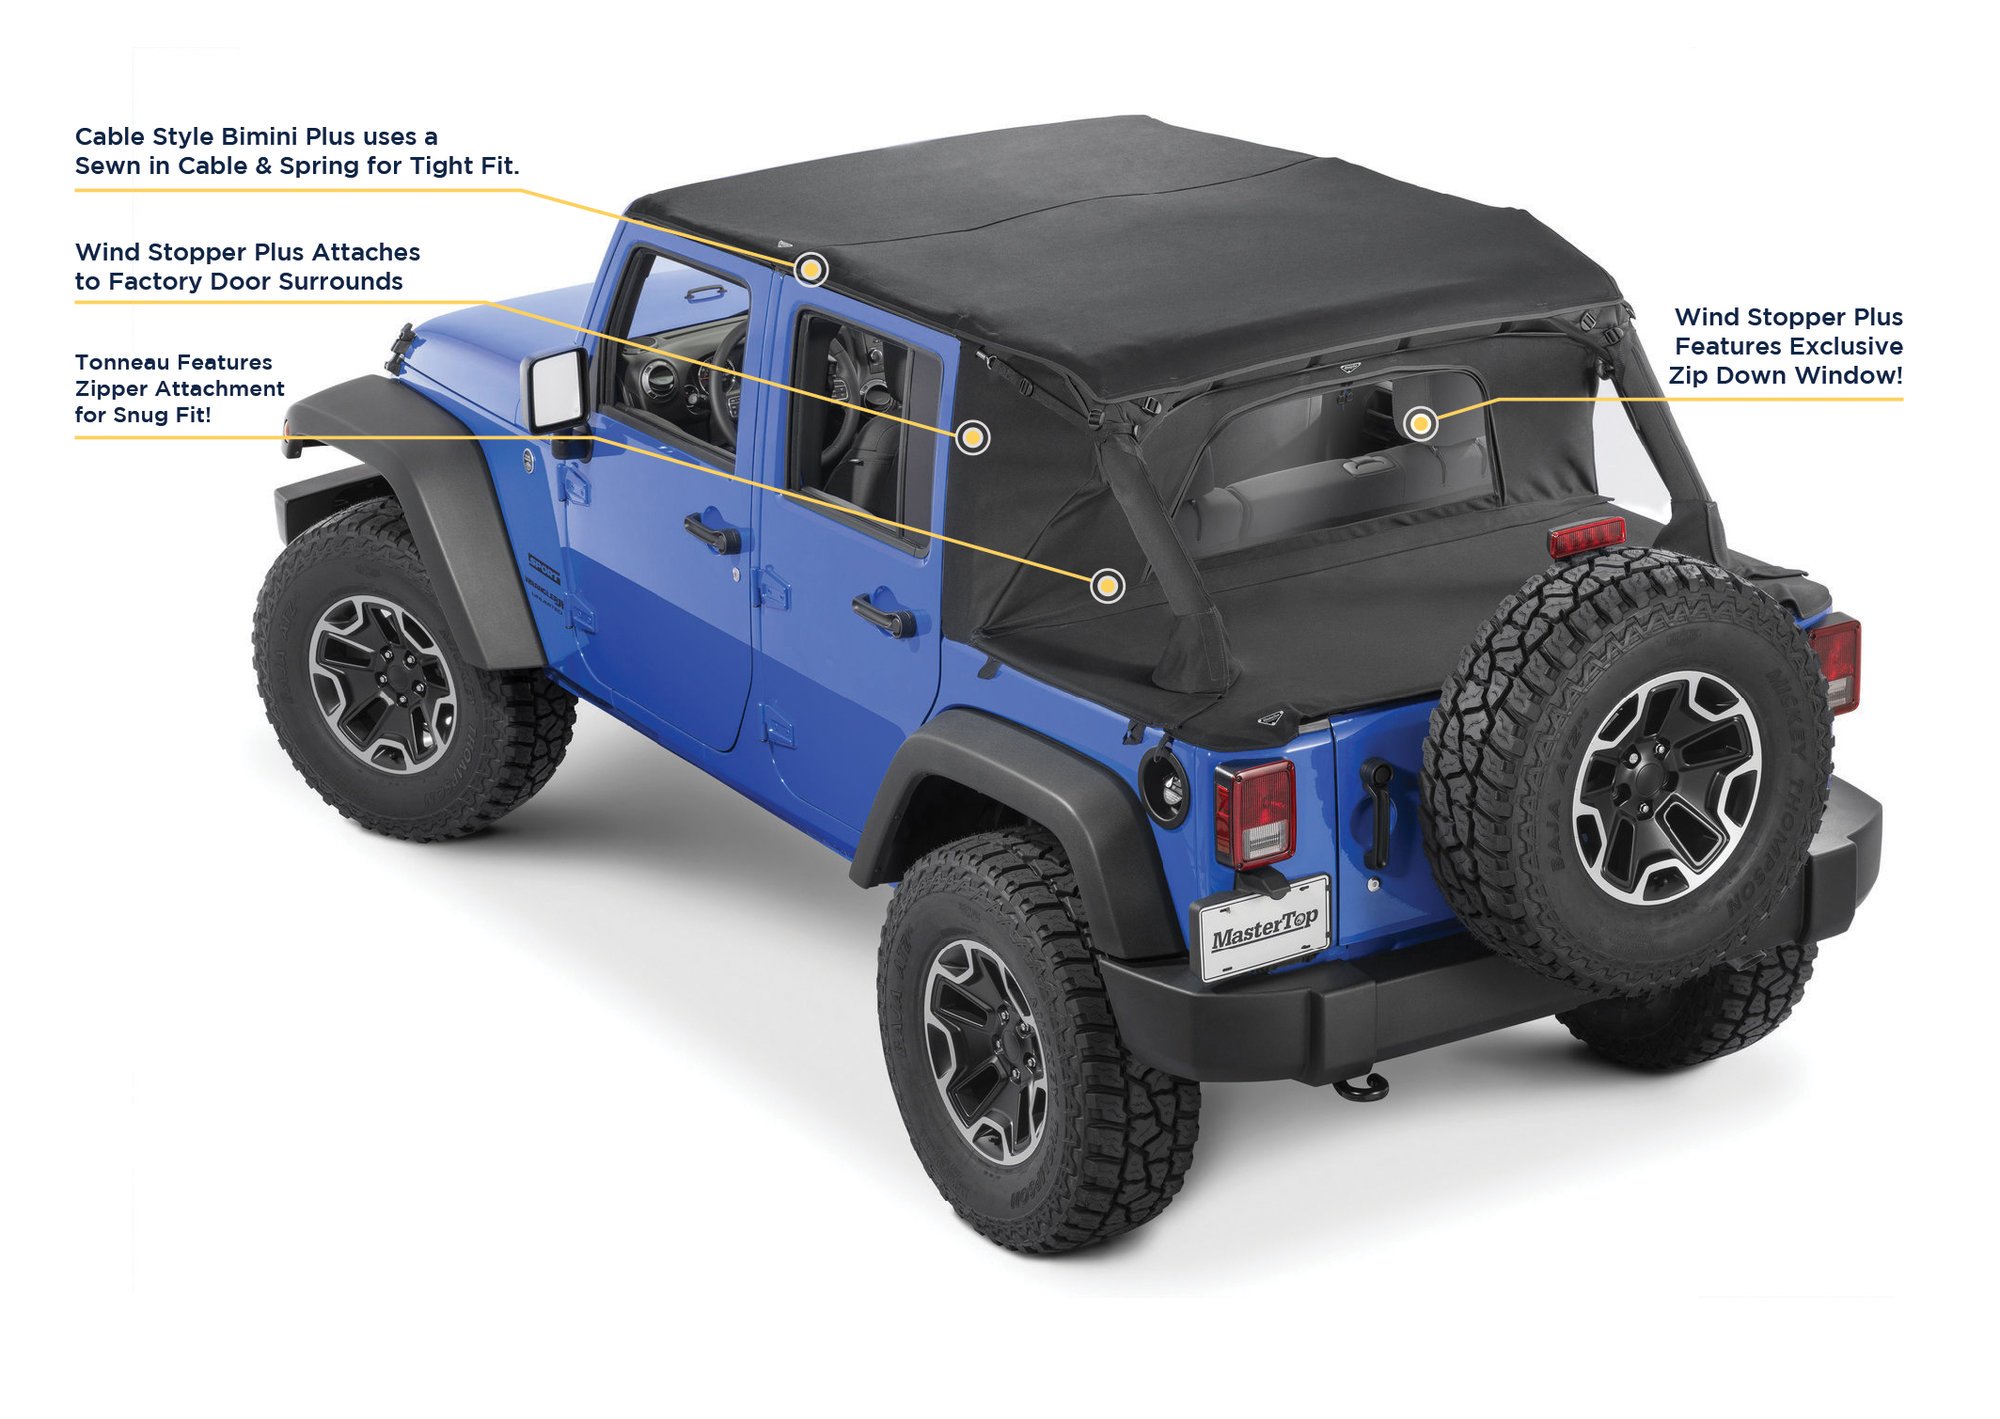 Jeep JK Combo For Soft Top Equipped Cable Style Bimini Top Plus 10-18 Wrangler  JK 4 Door w/s Header WindStopper Plus and Tonneau MasterTwill MasterTop |  Krawl Off Road